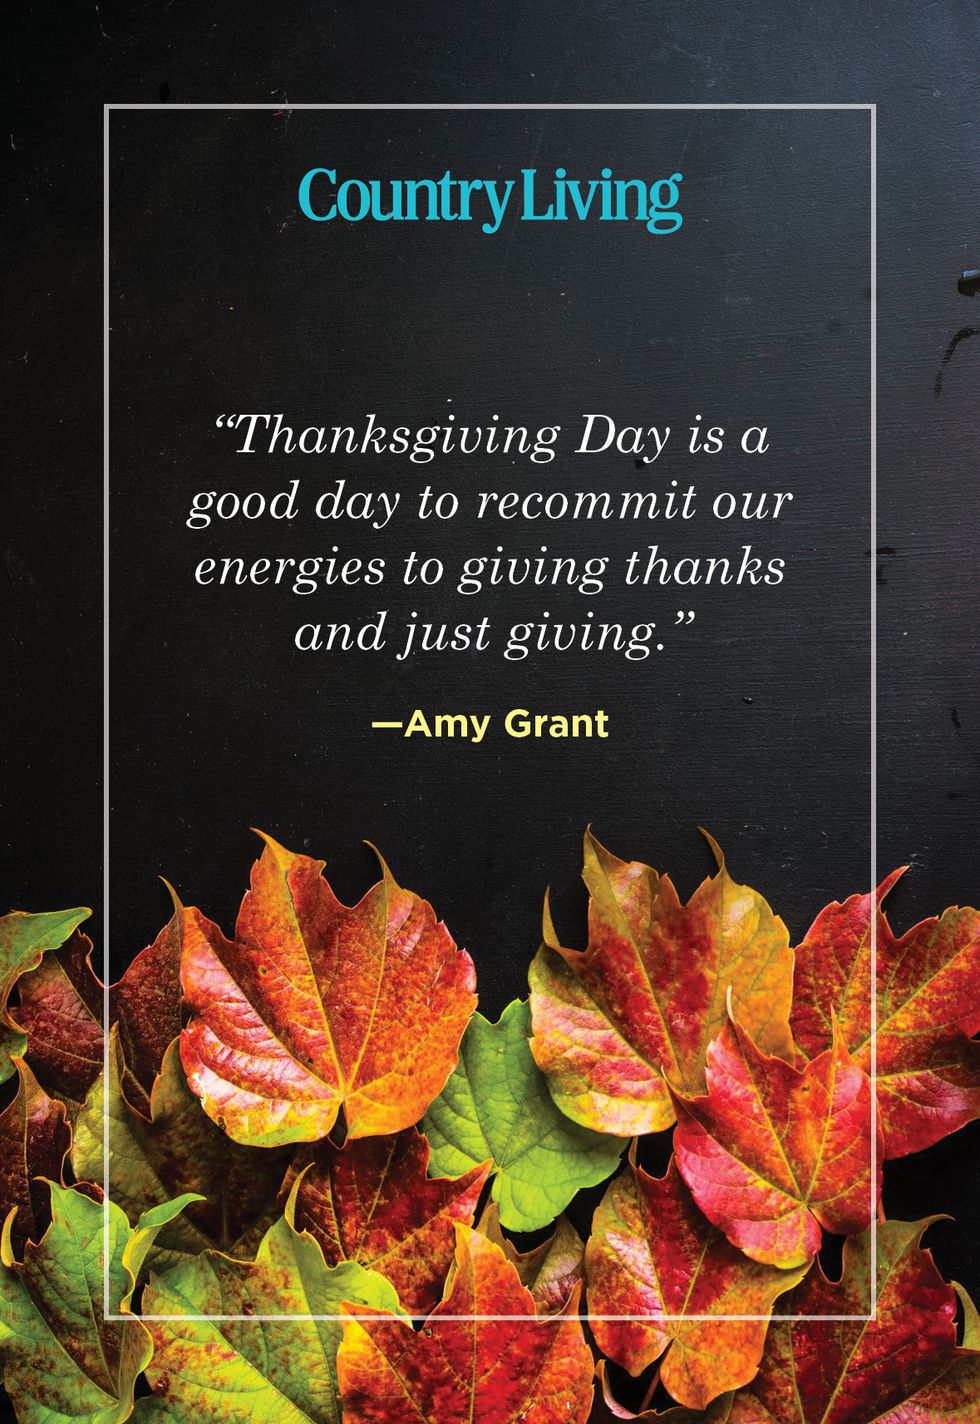 thanksgiving quote by amy grant on dark background with colorful autumn leaves